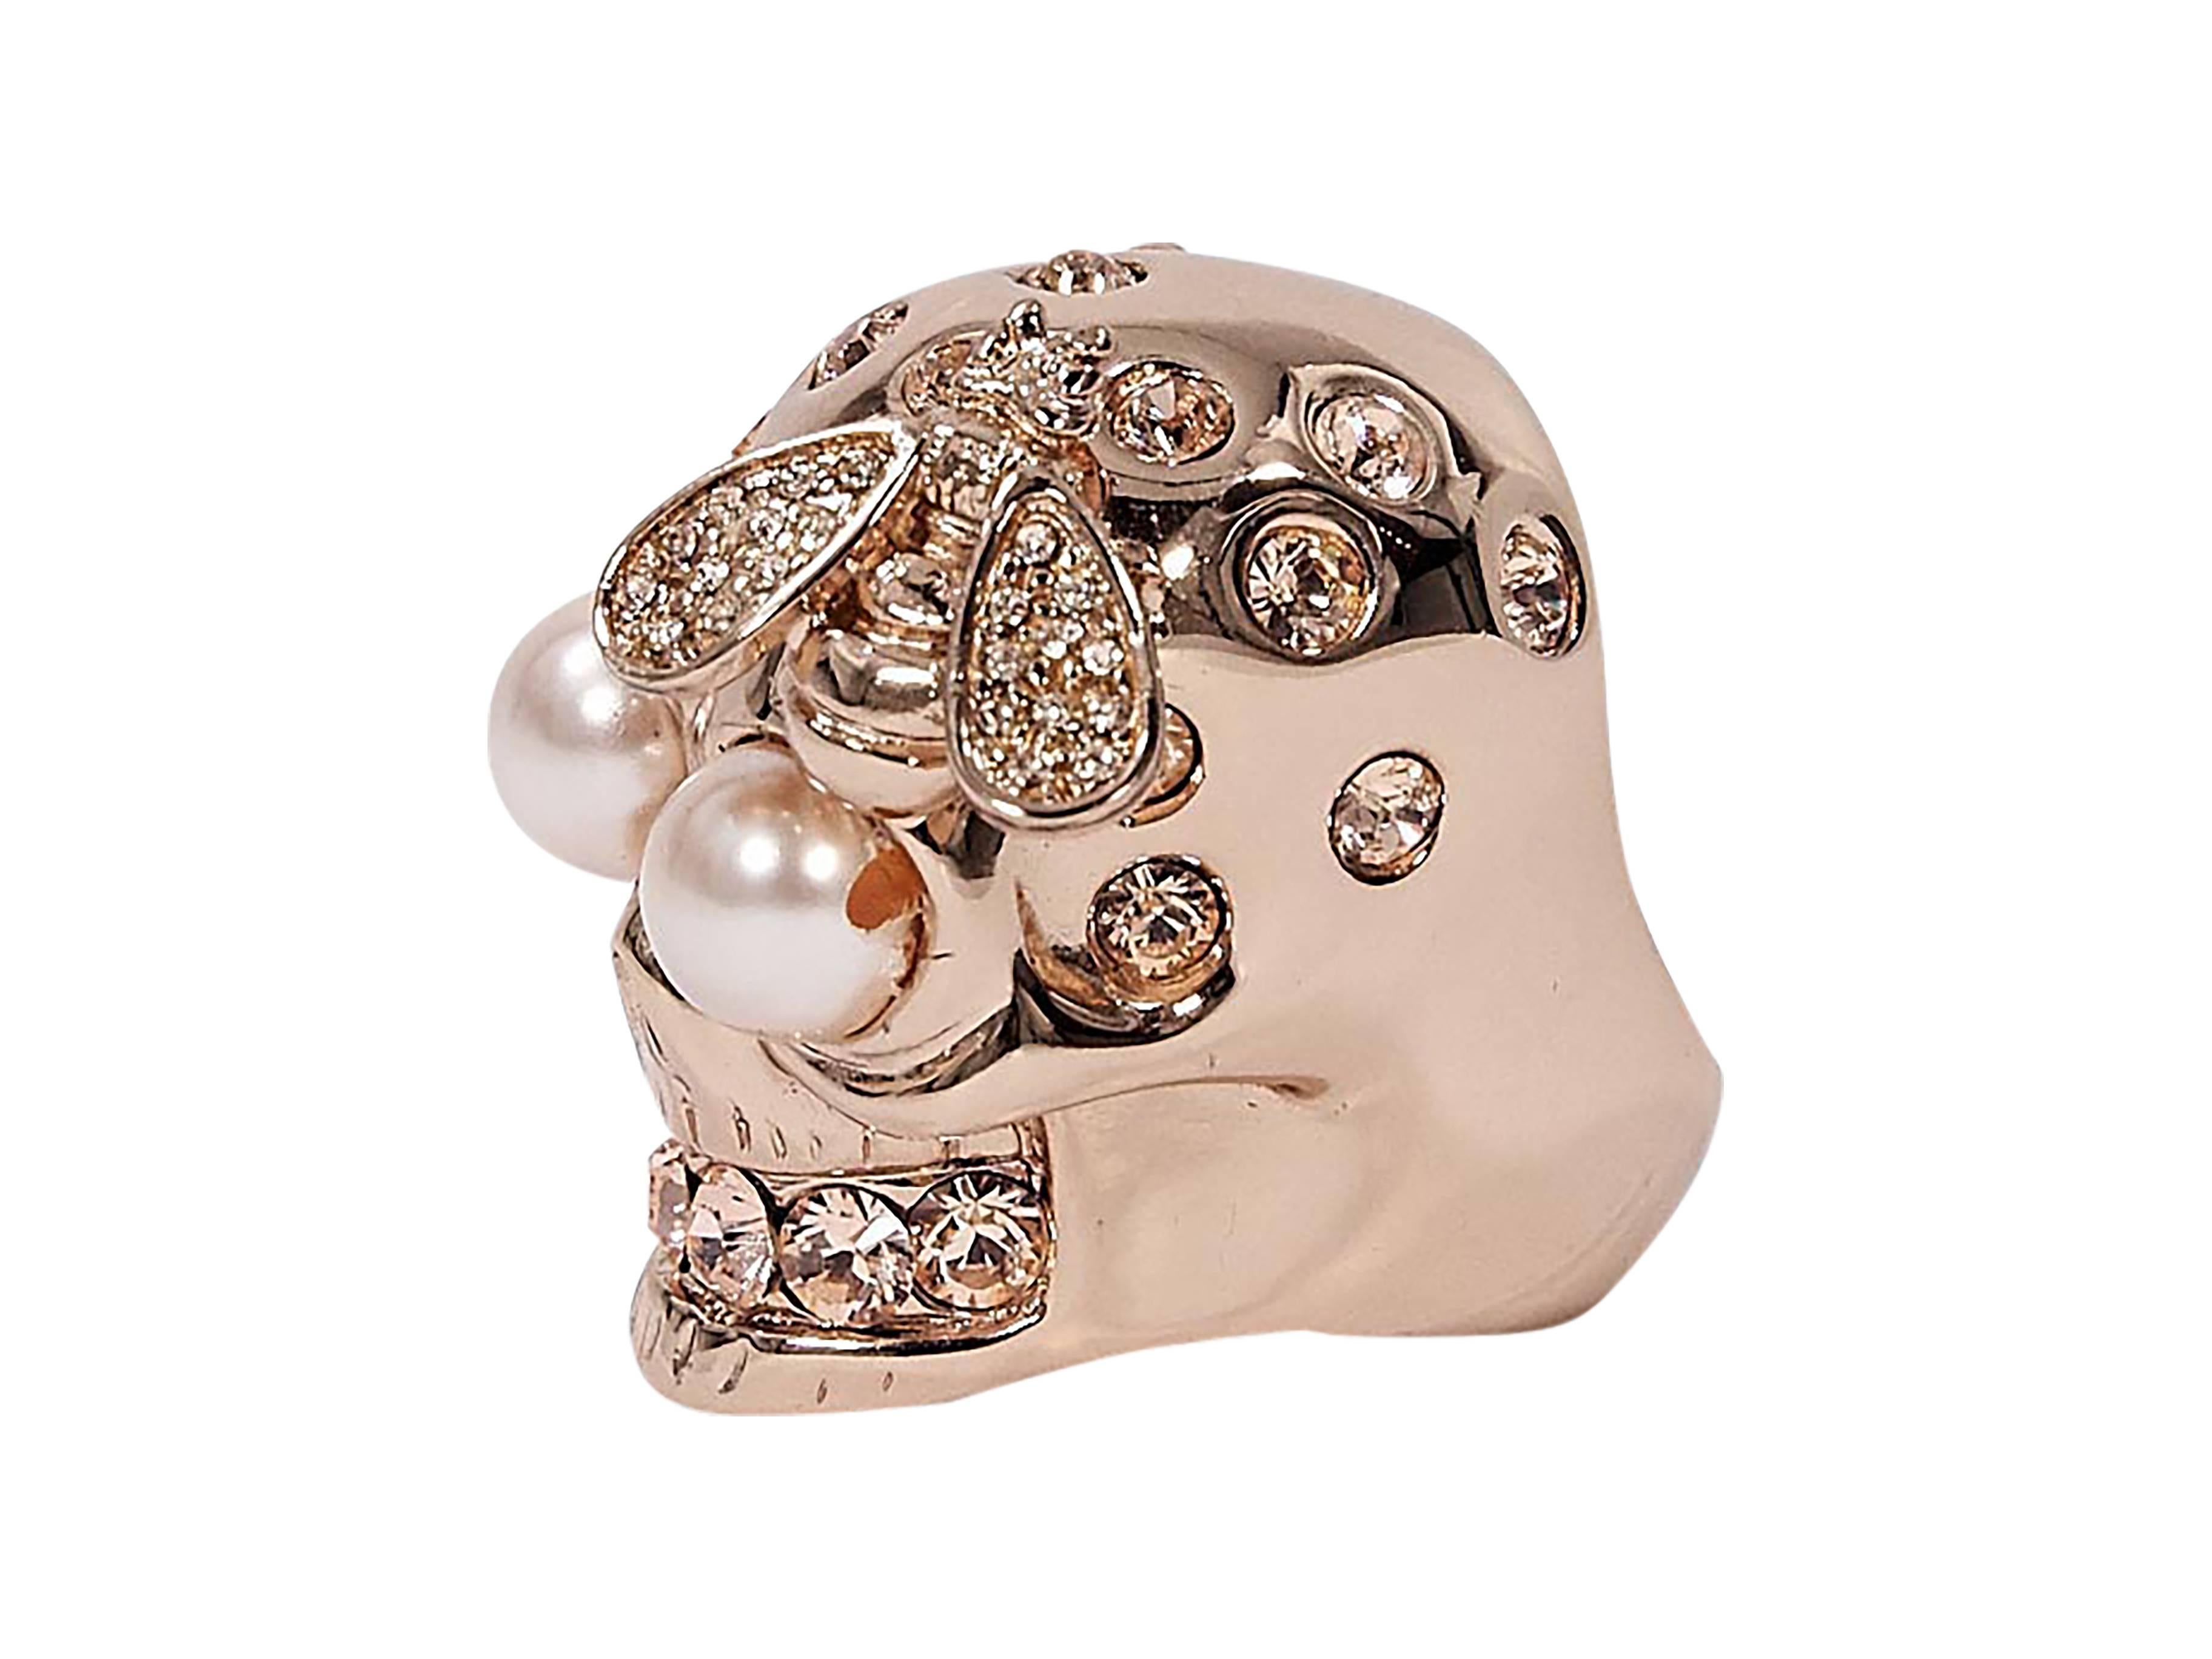 Product details:  Rose gold-tone skull and bee cocktail ring by Alexander McQueen.  Embellished design. 
Condition: Pre-owned. Very good.

Size 4.5 

Est. Retail $ 445.00
